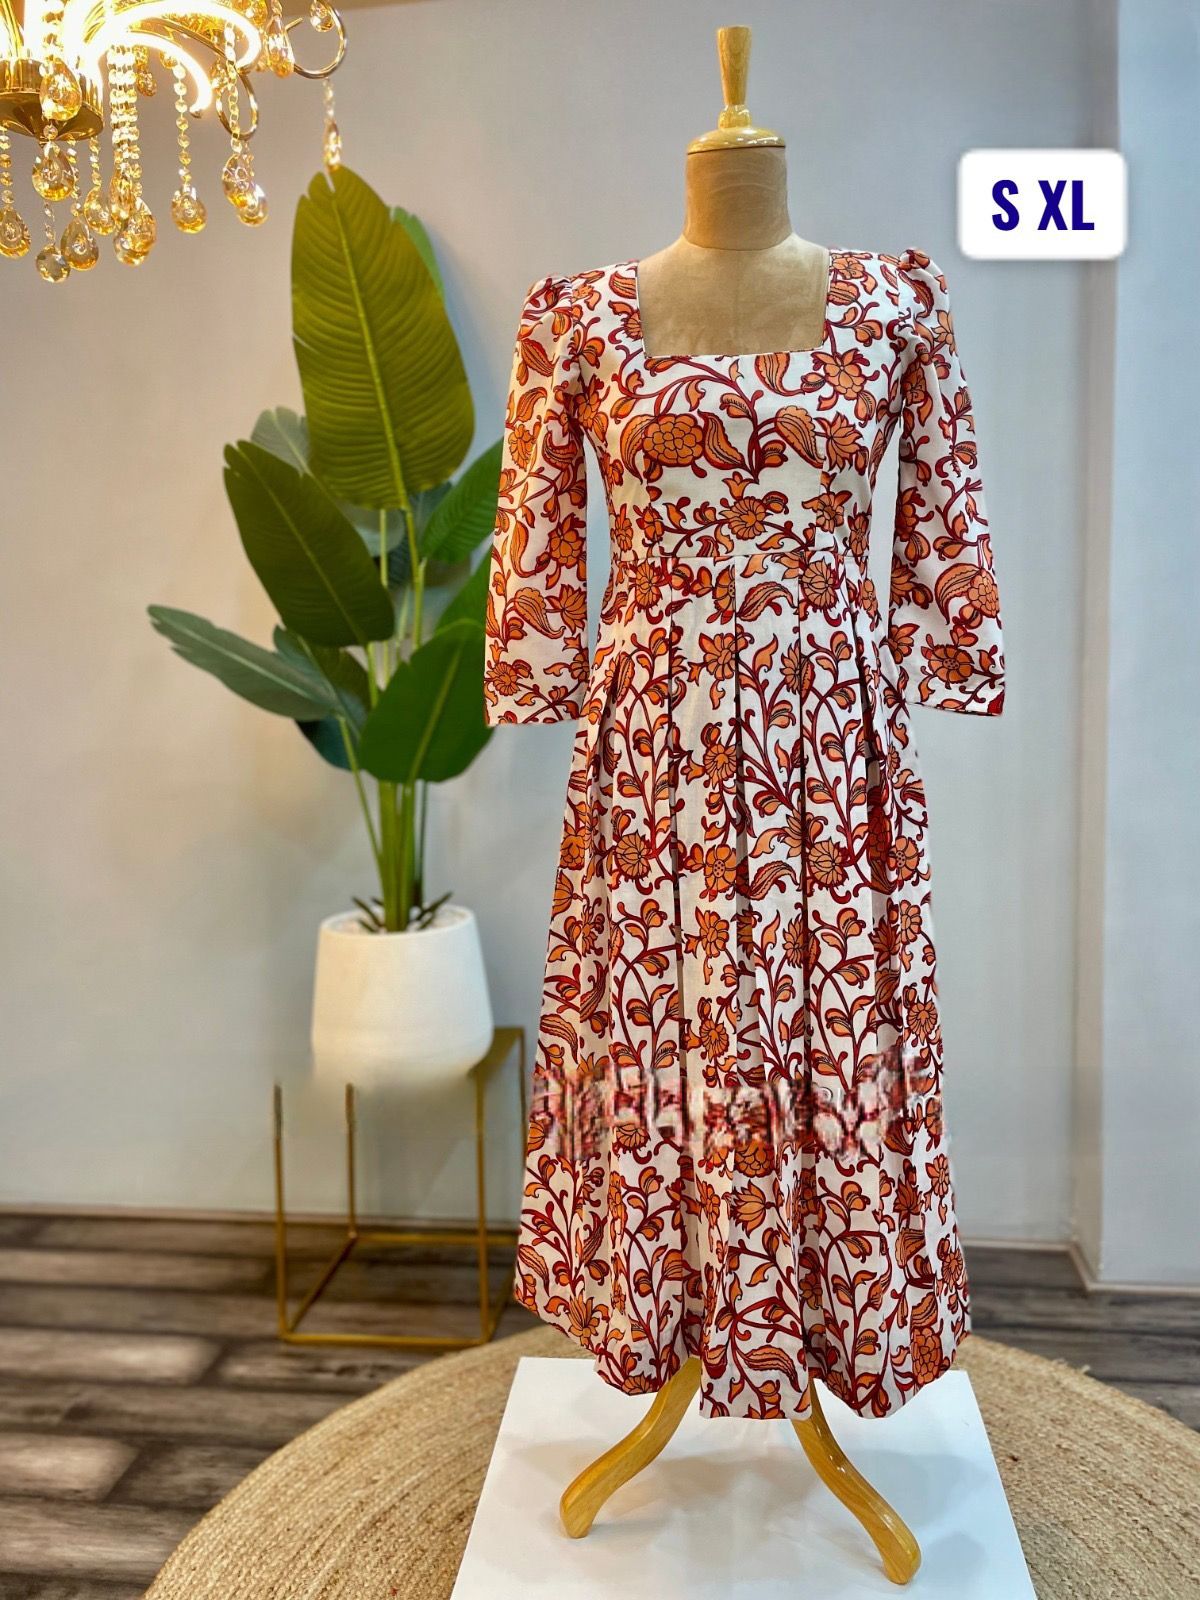 Elegant Playful Kalamkari A-Line Dress square neck and box pleats in front and back with puff 3/4 sleeves Partywear dress